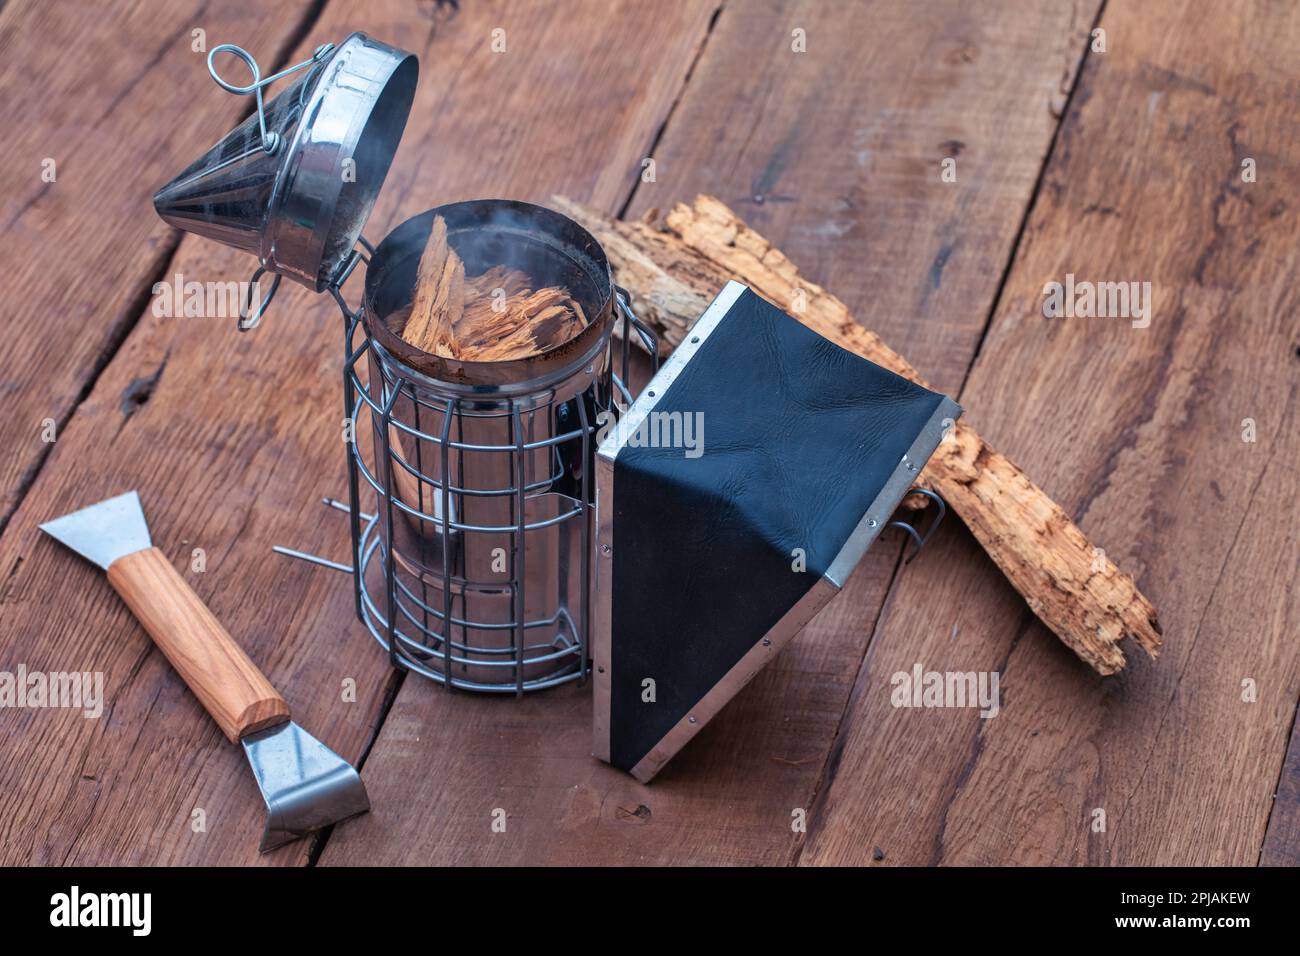 The set also comes with a smoker, hive tool, and bee brush, all neatly arranged on a wooden table. Stock Photo